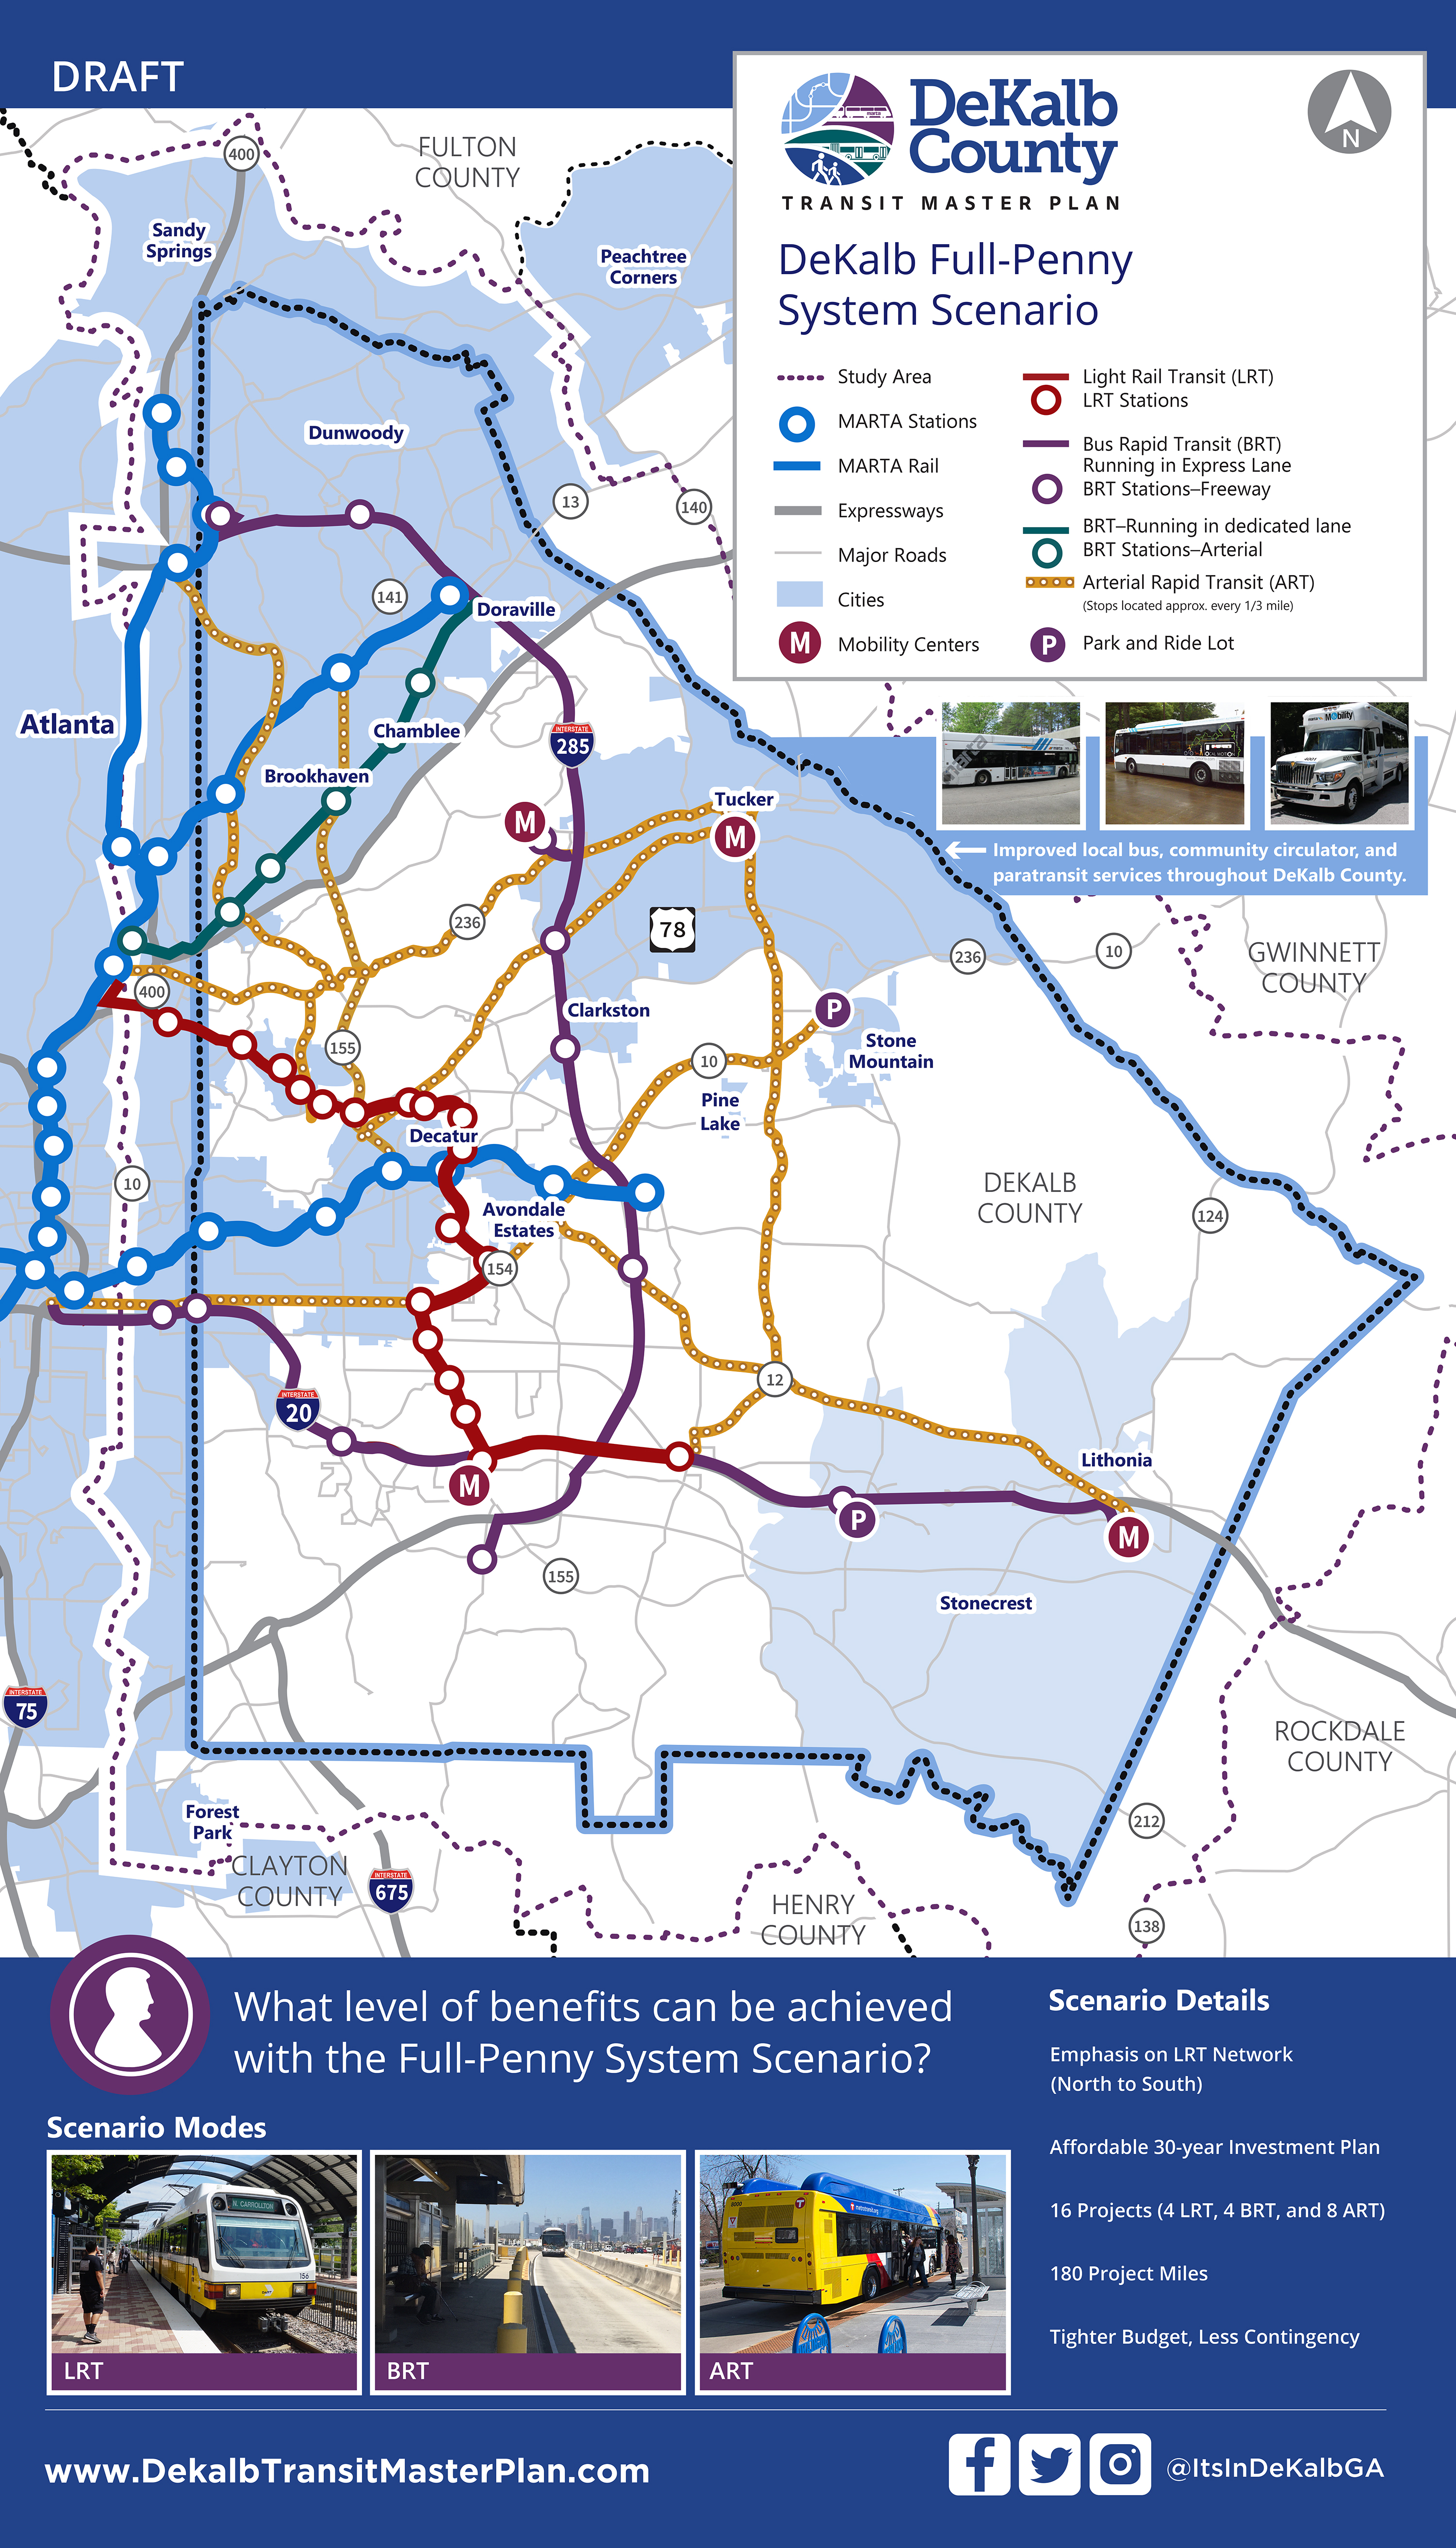 DeKalb County Full-Penny System Scenario features 16 projects-4 LRT, 4 BRT, and 8 ART and 180 project miles, which are affordable under a full-penny sales tax increase.